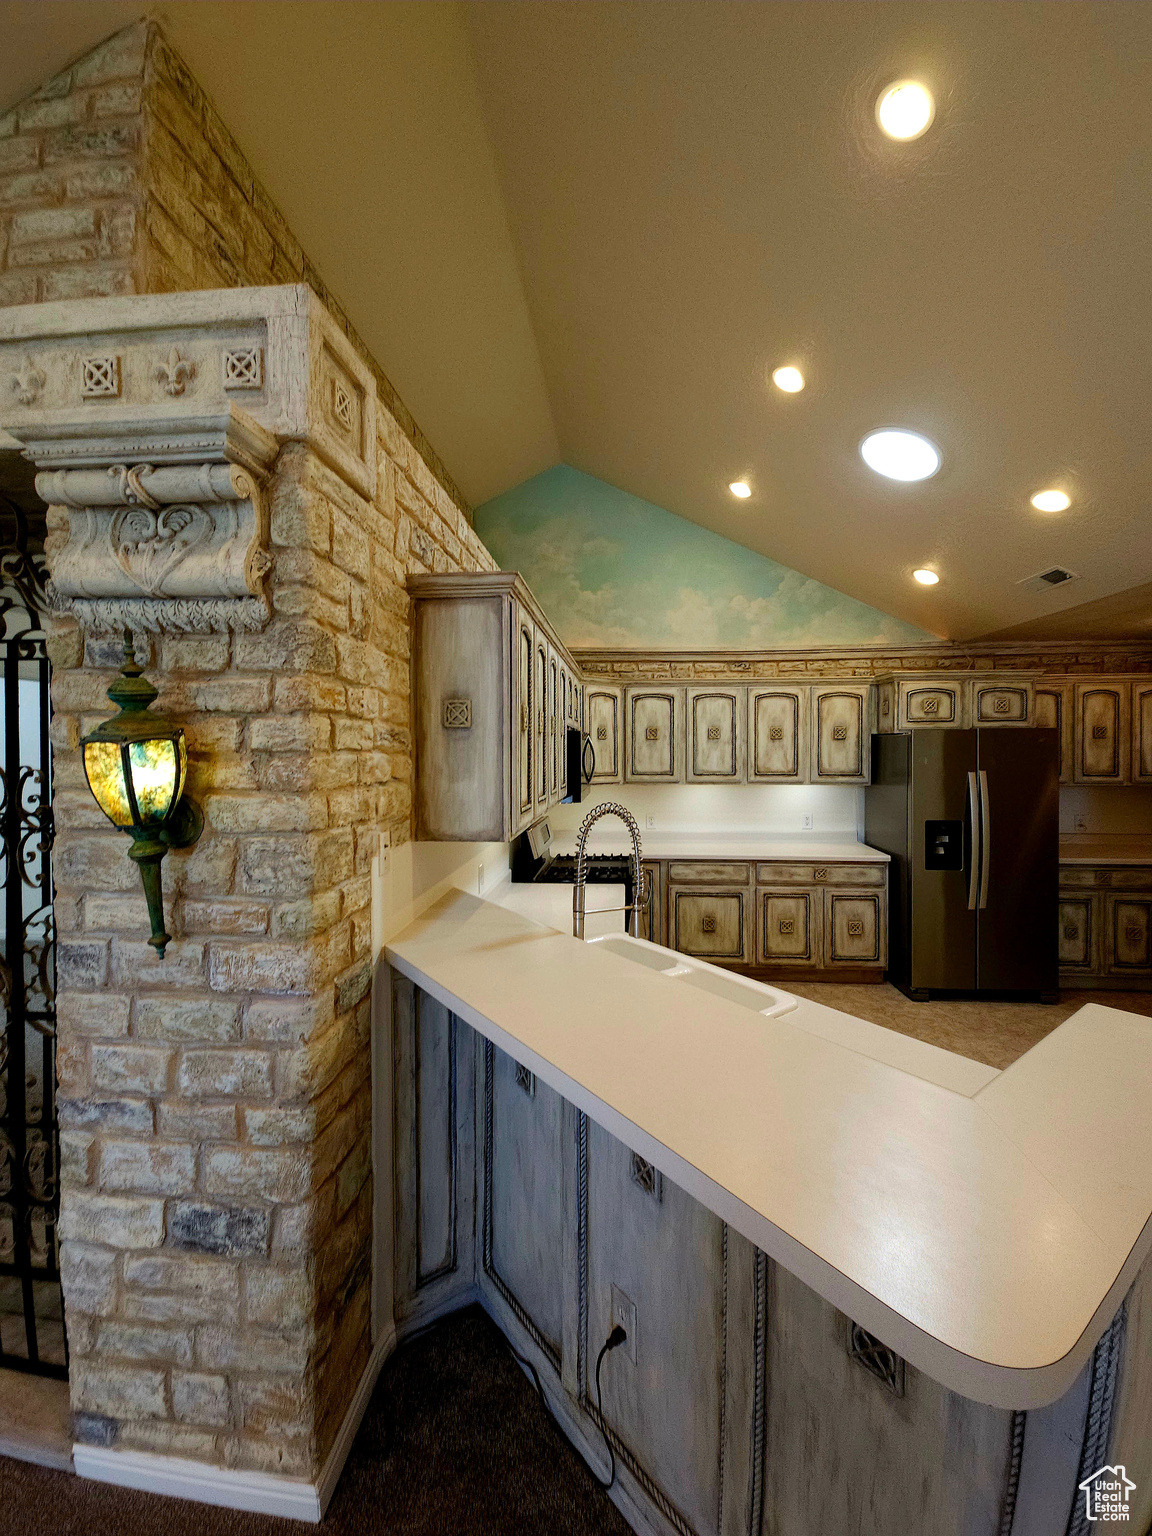 Custom stone embraces and anchors the kitchen in warmth.